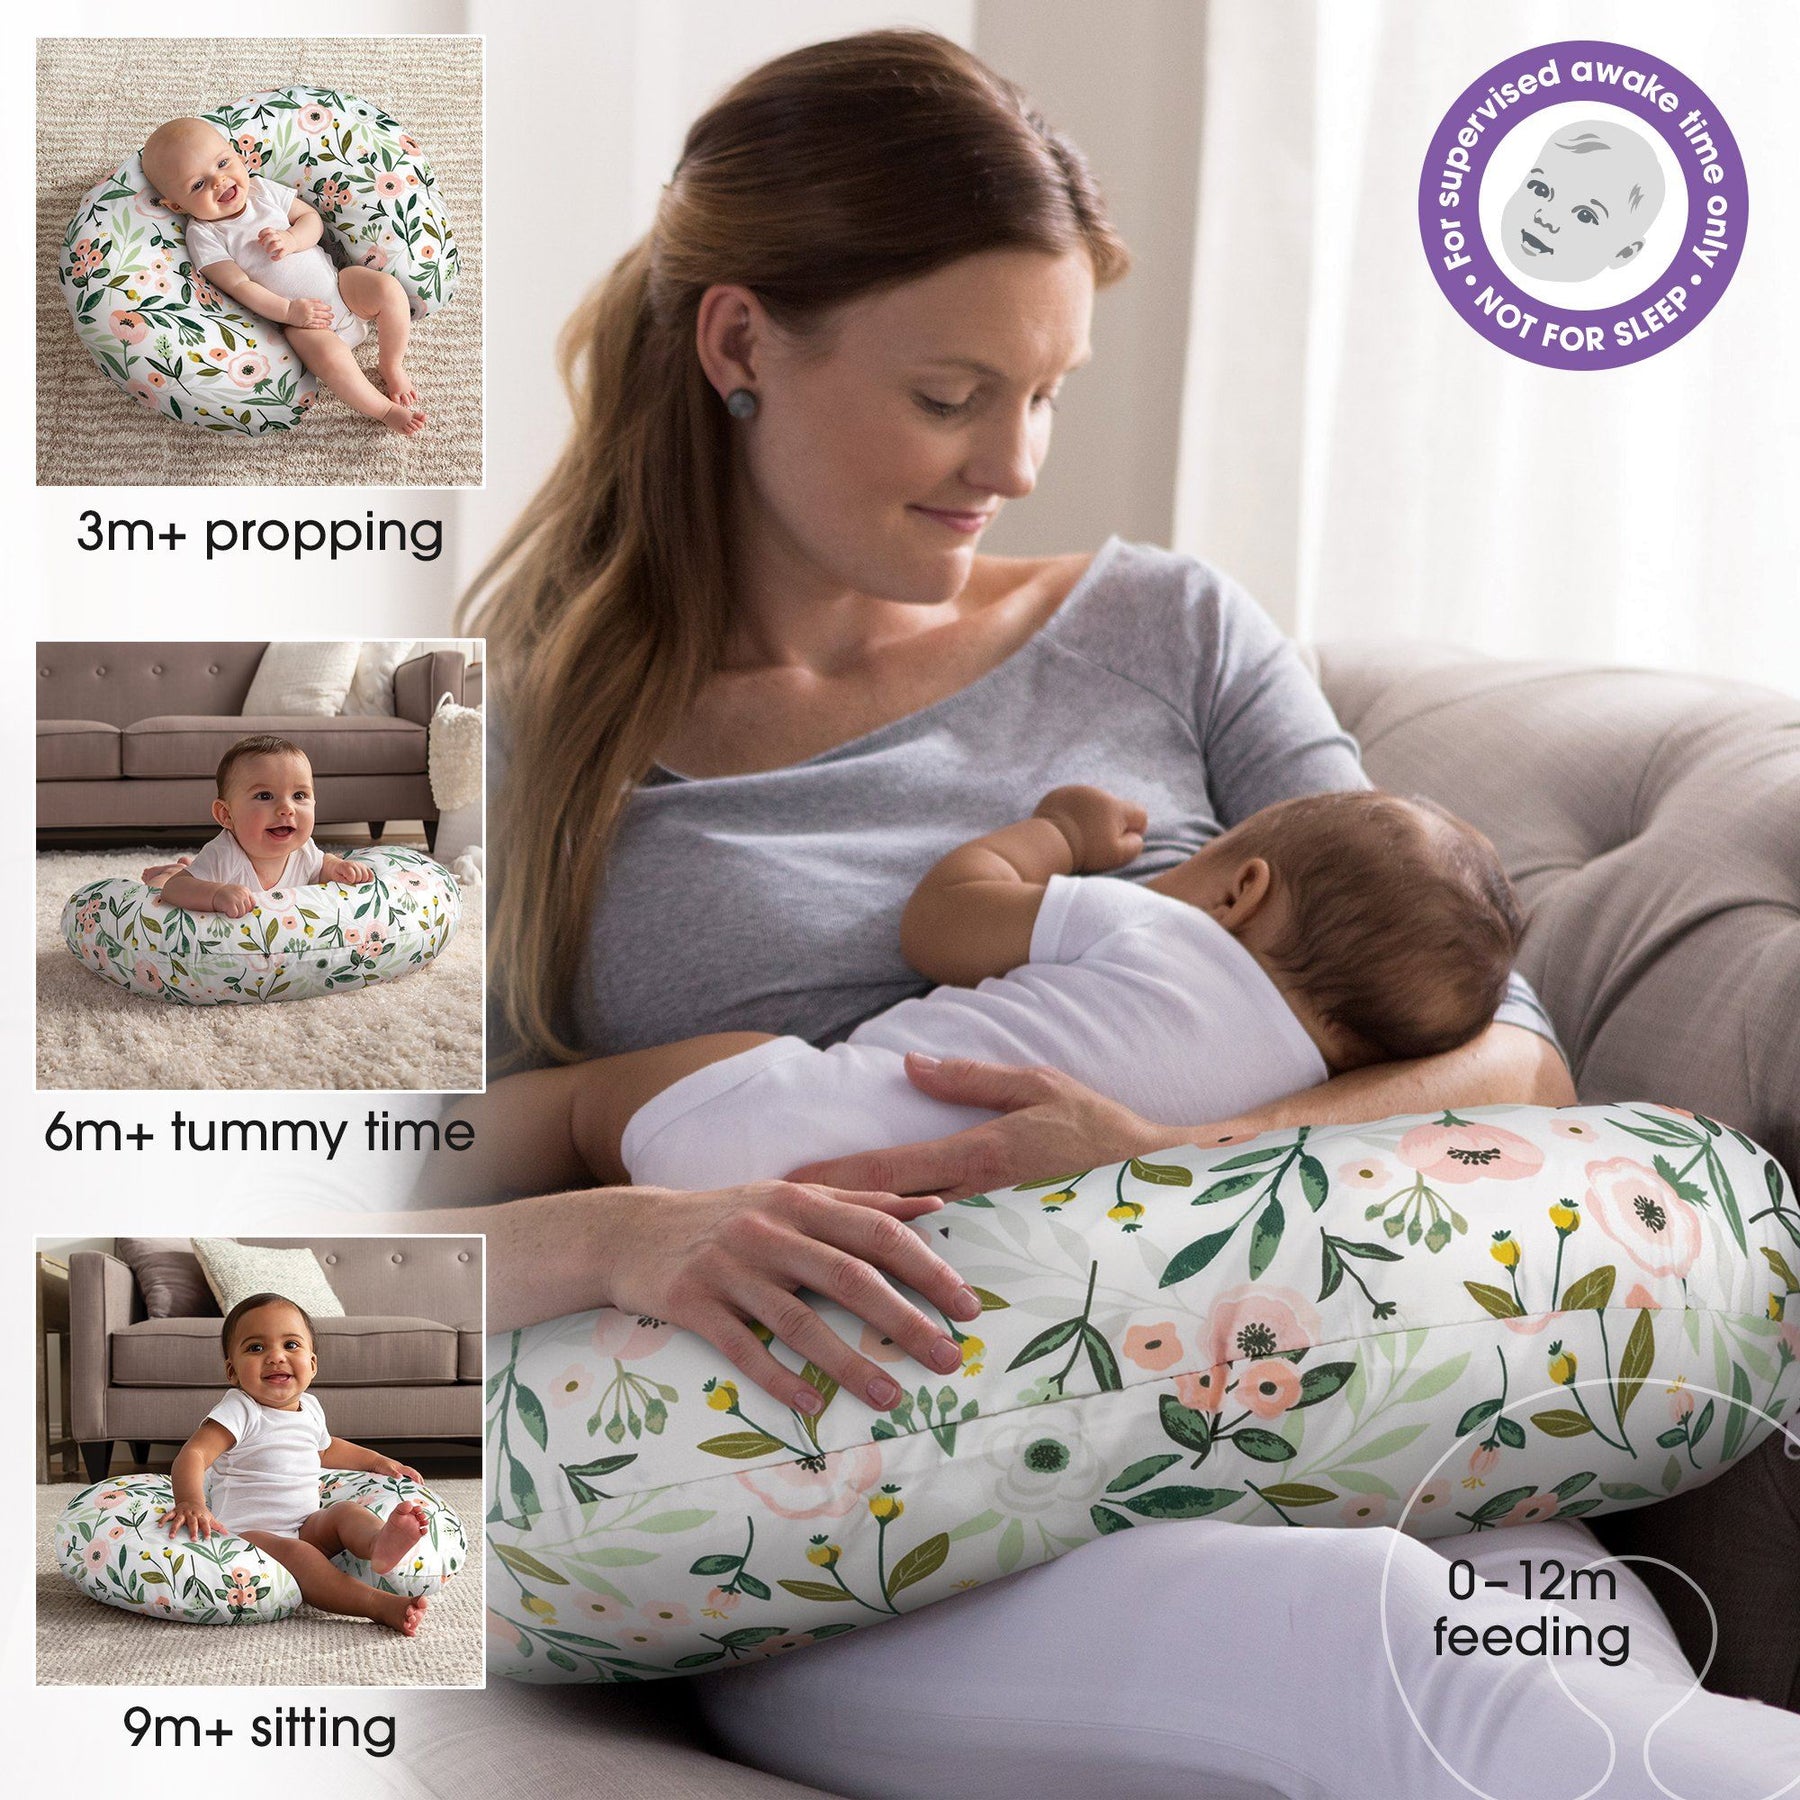 Boppy Pillow Feeding and Infant Support Pillow - Noodle Soup